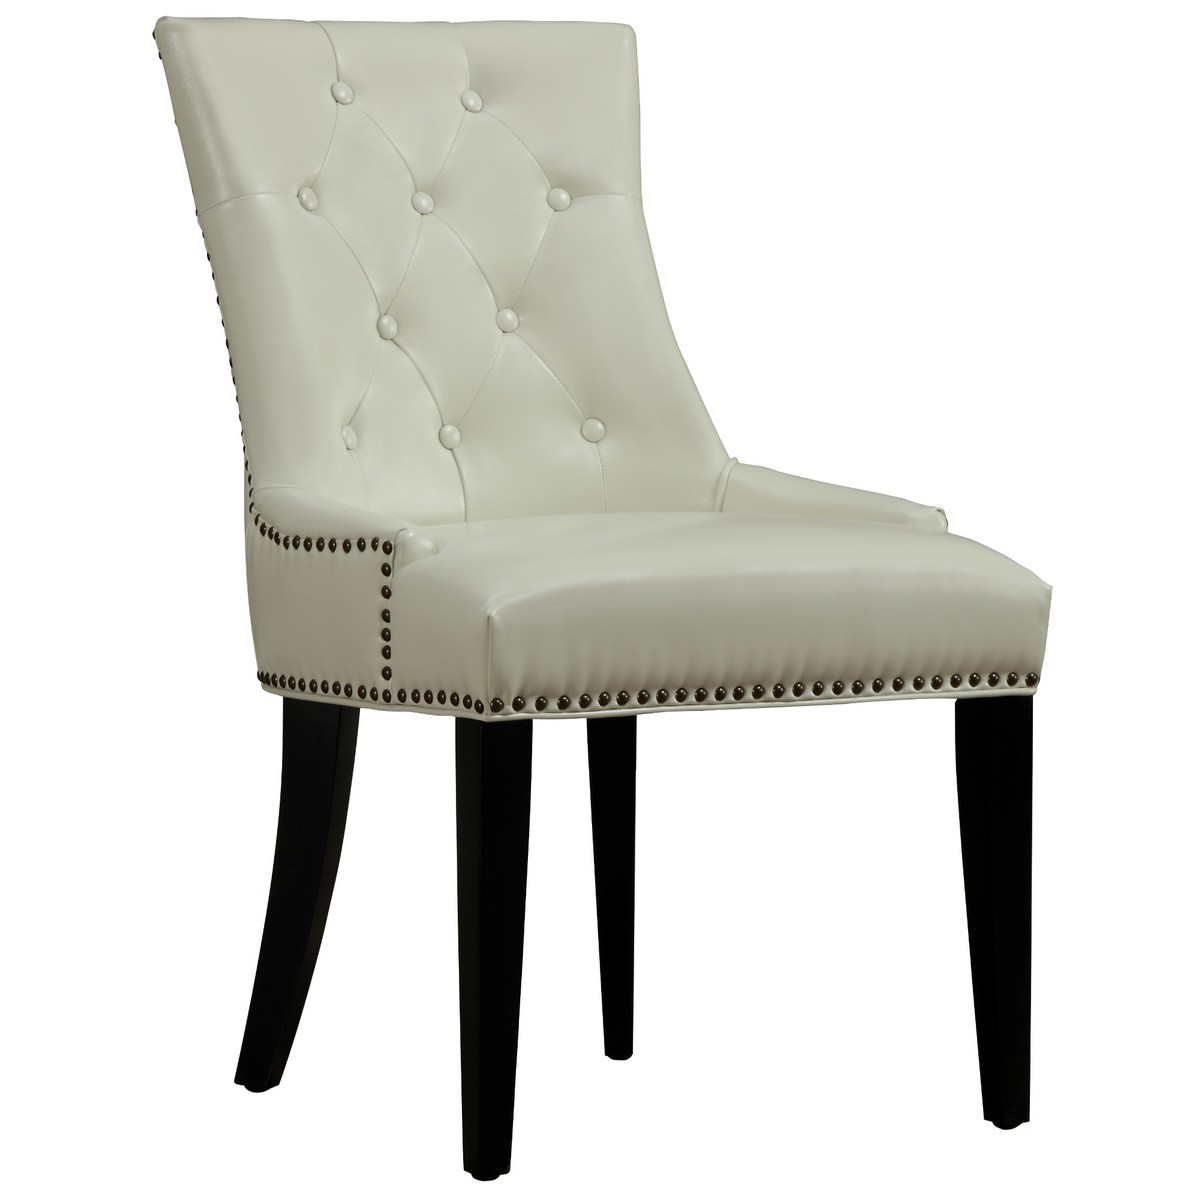 TOV Furniture Uptown Cream Leather Dining Chair